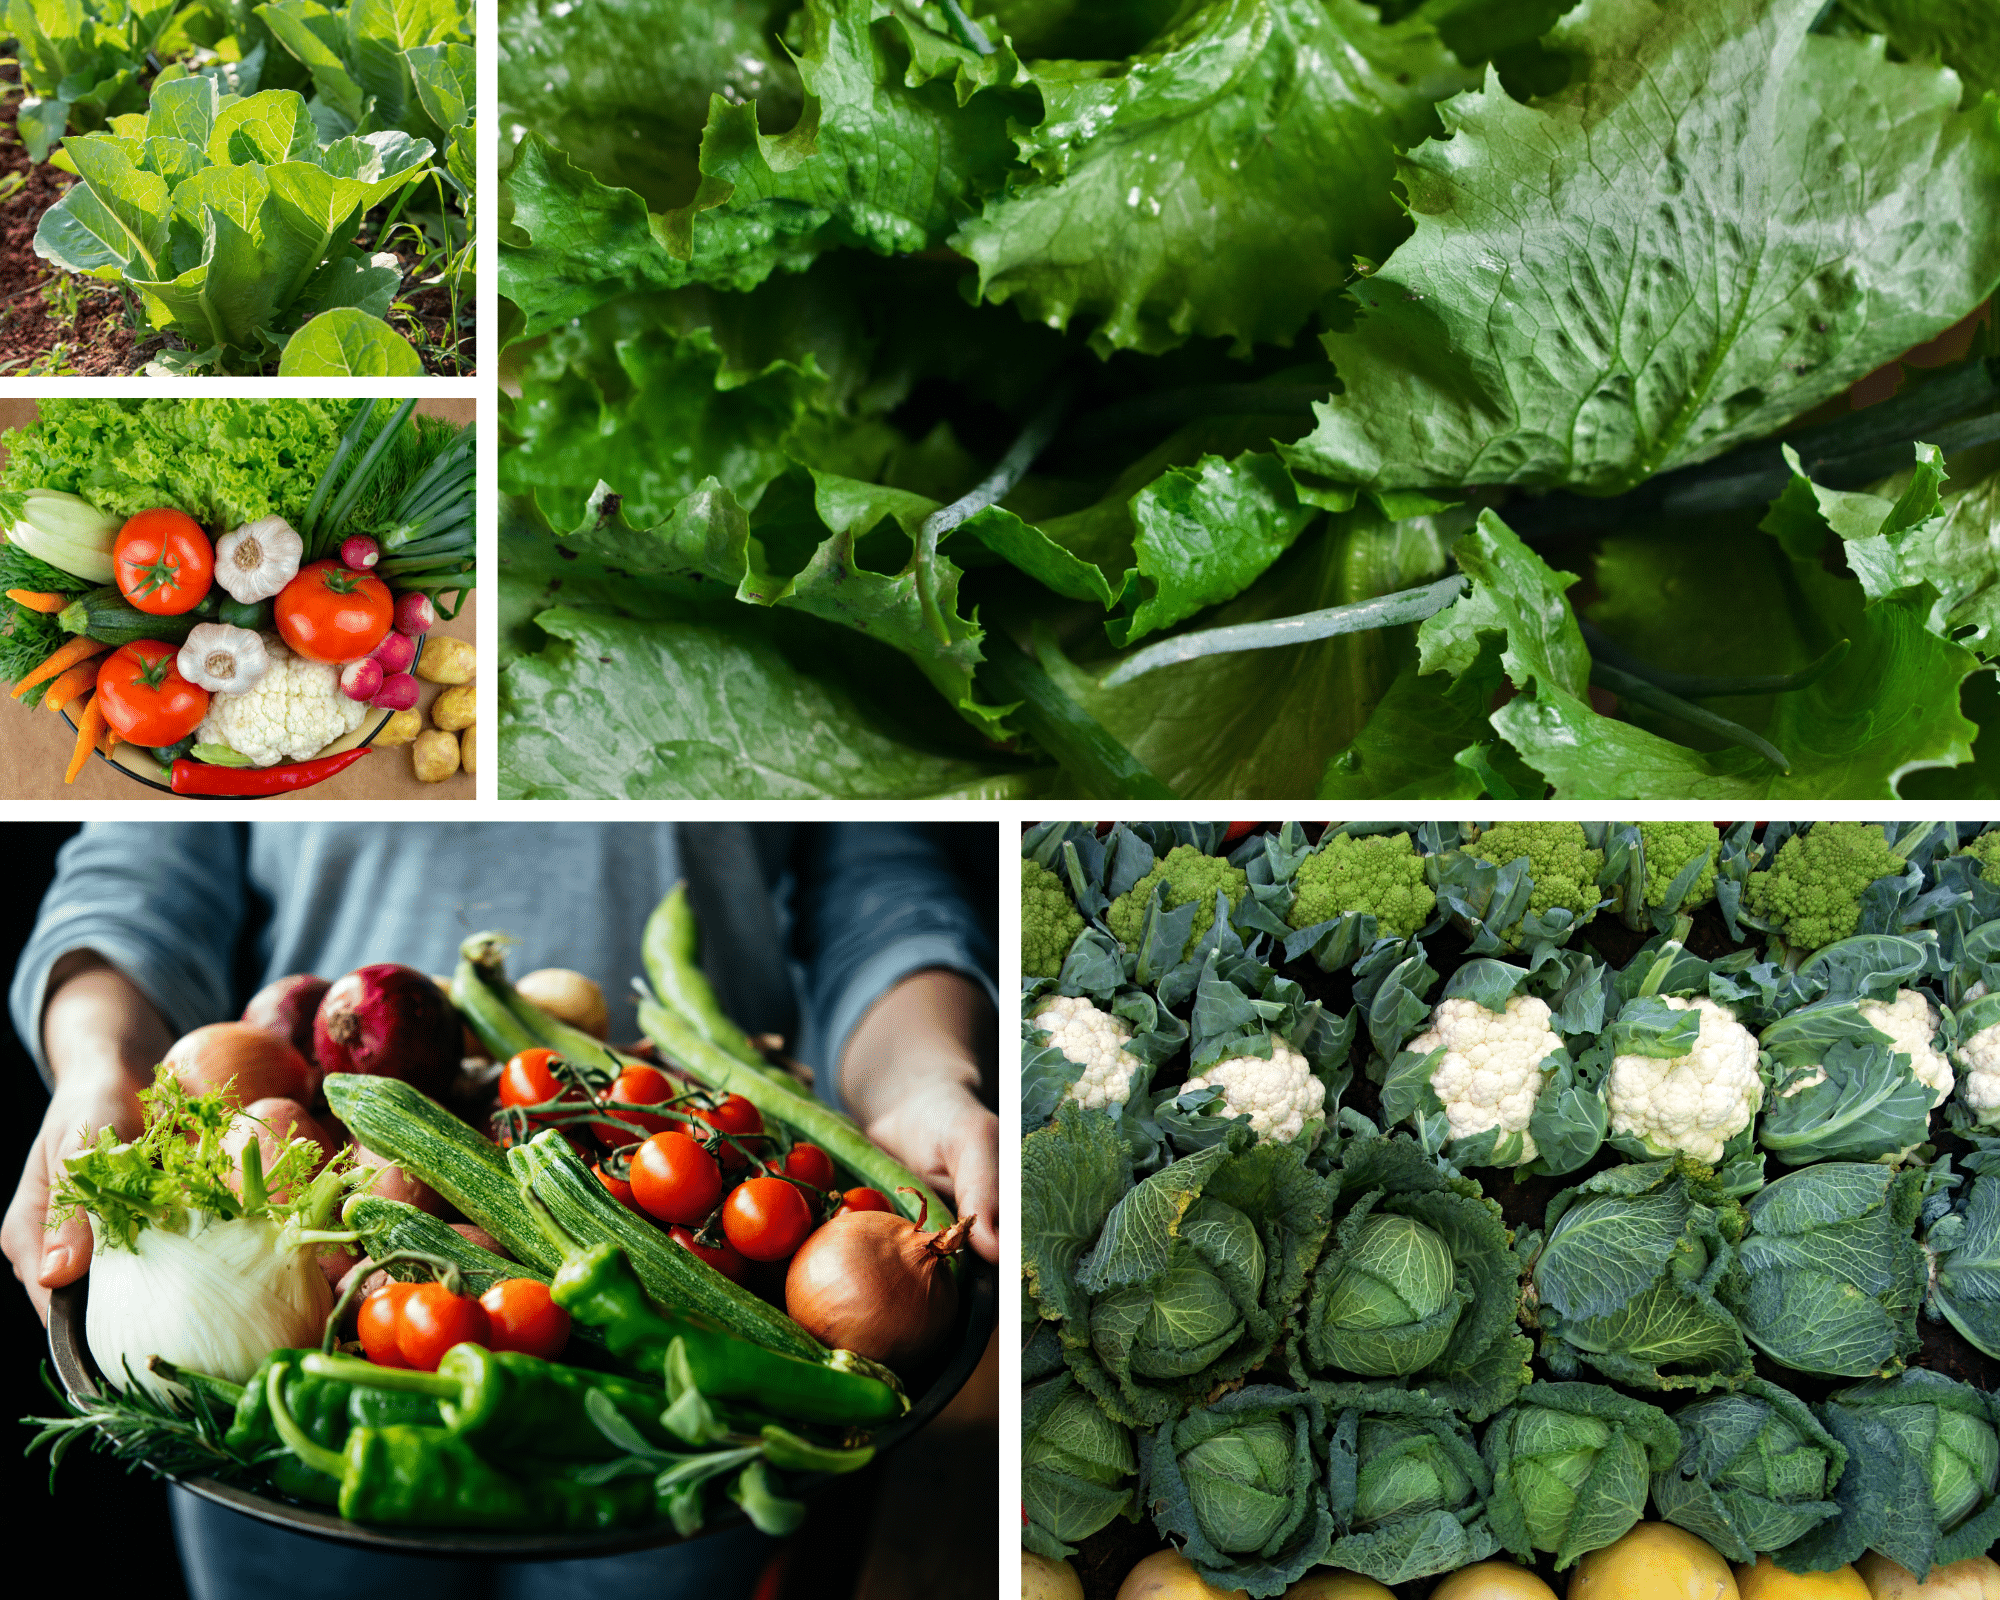 Green Natural Vegetables Photo Collage